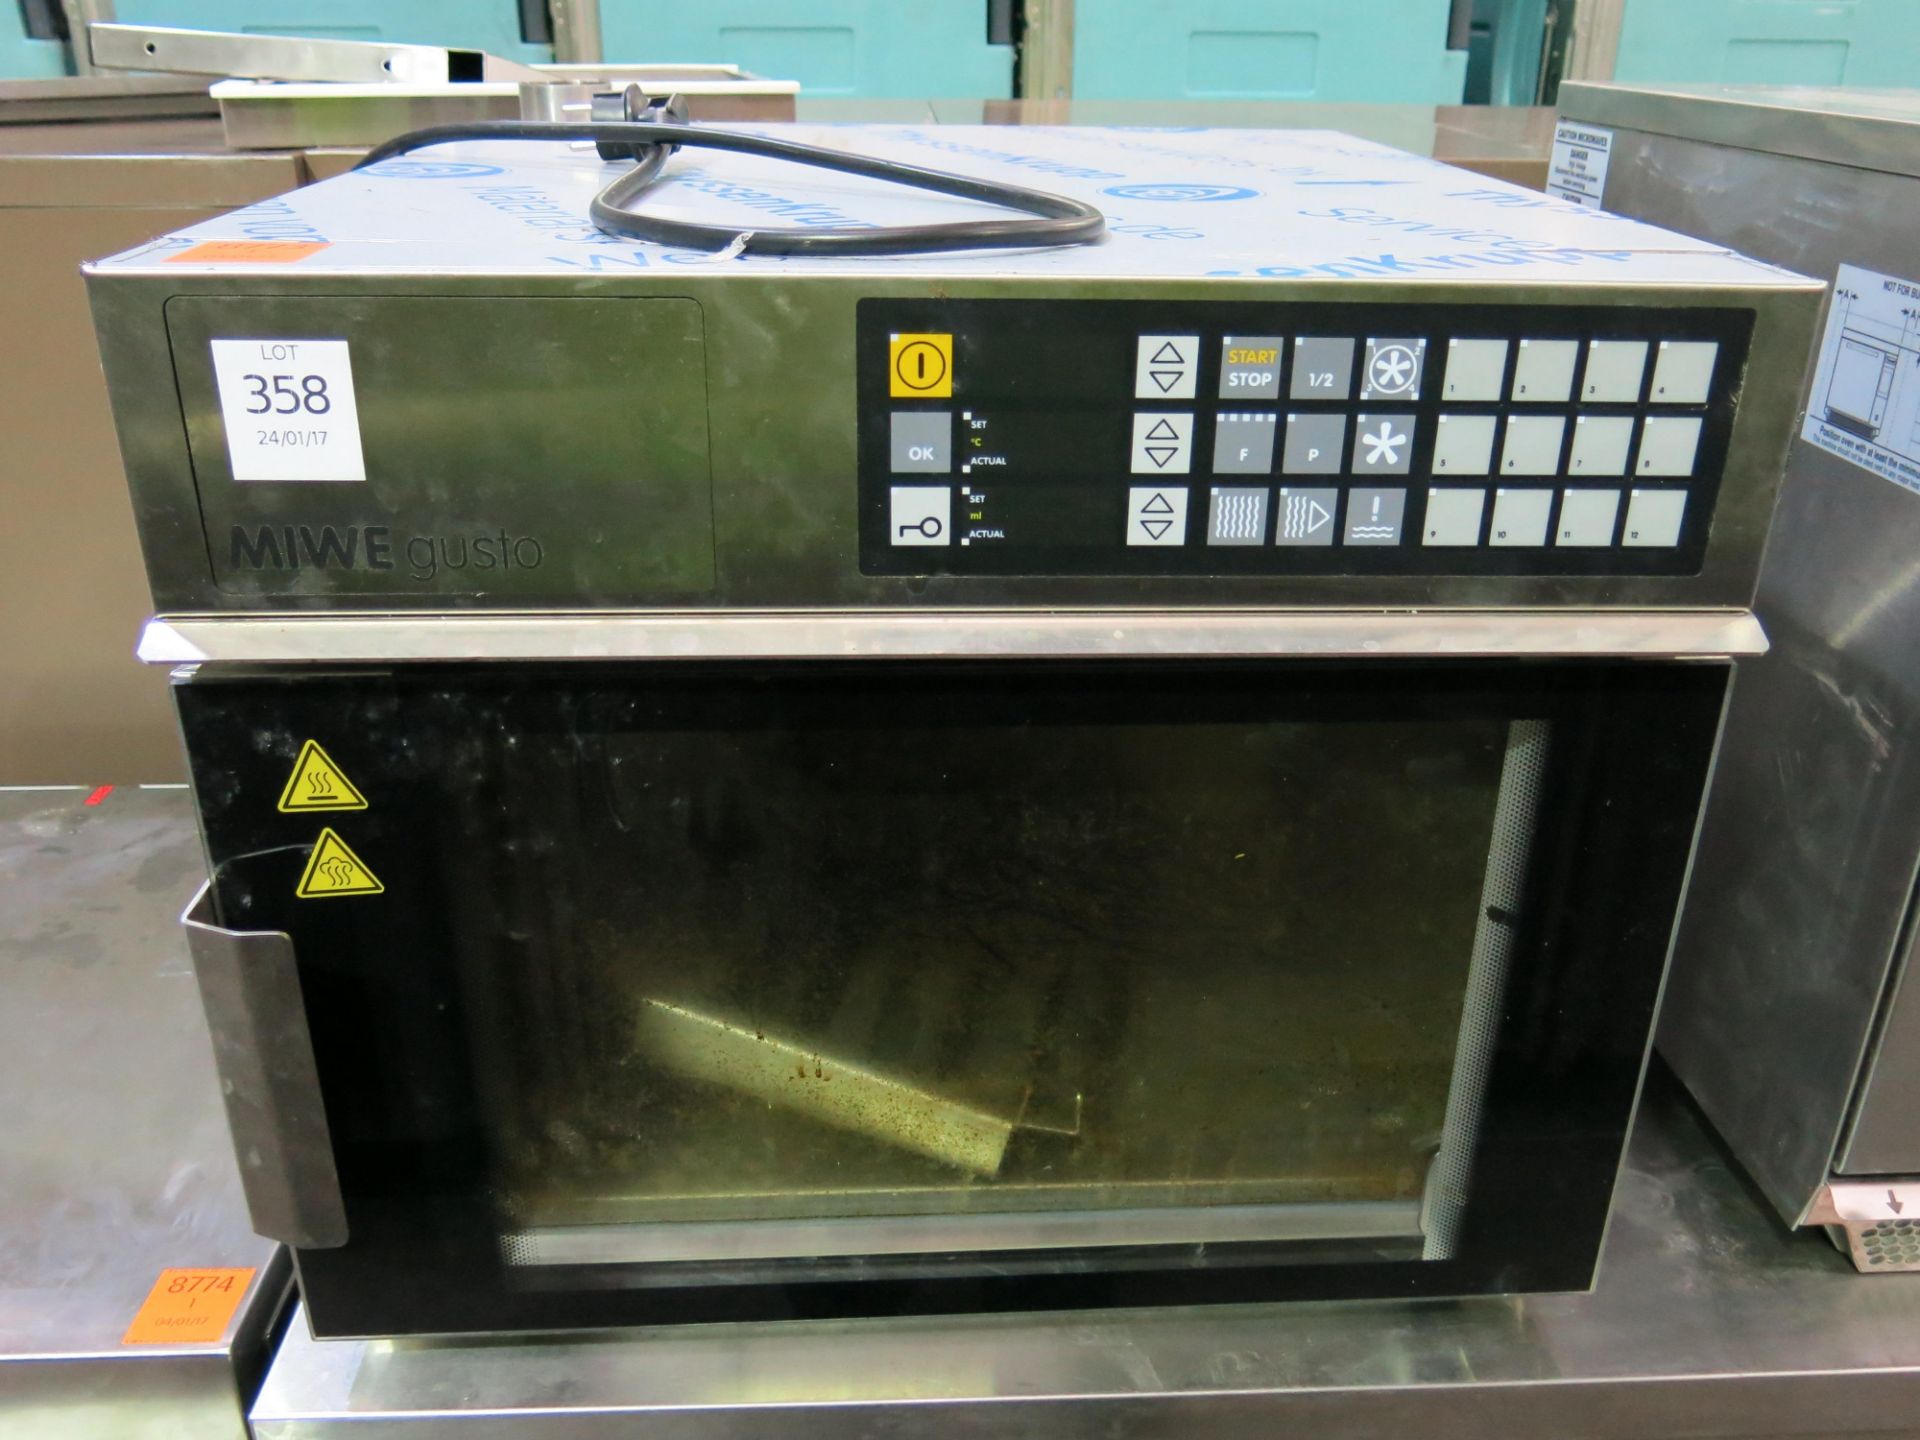 * A Miwi Gusto stainless steel counter top oven. Please note there is a £5 + VAT Lift Out Fee on